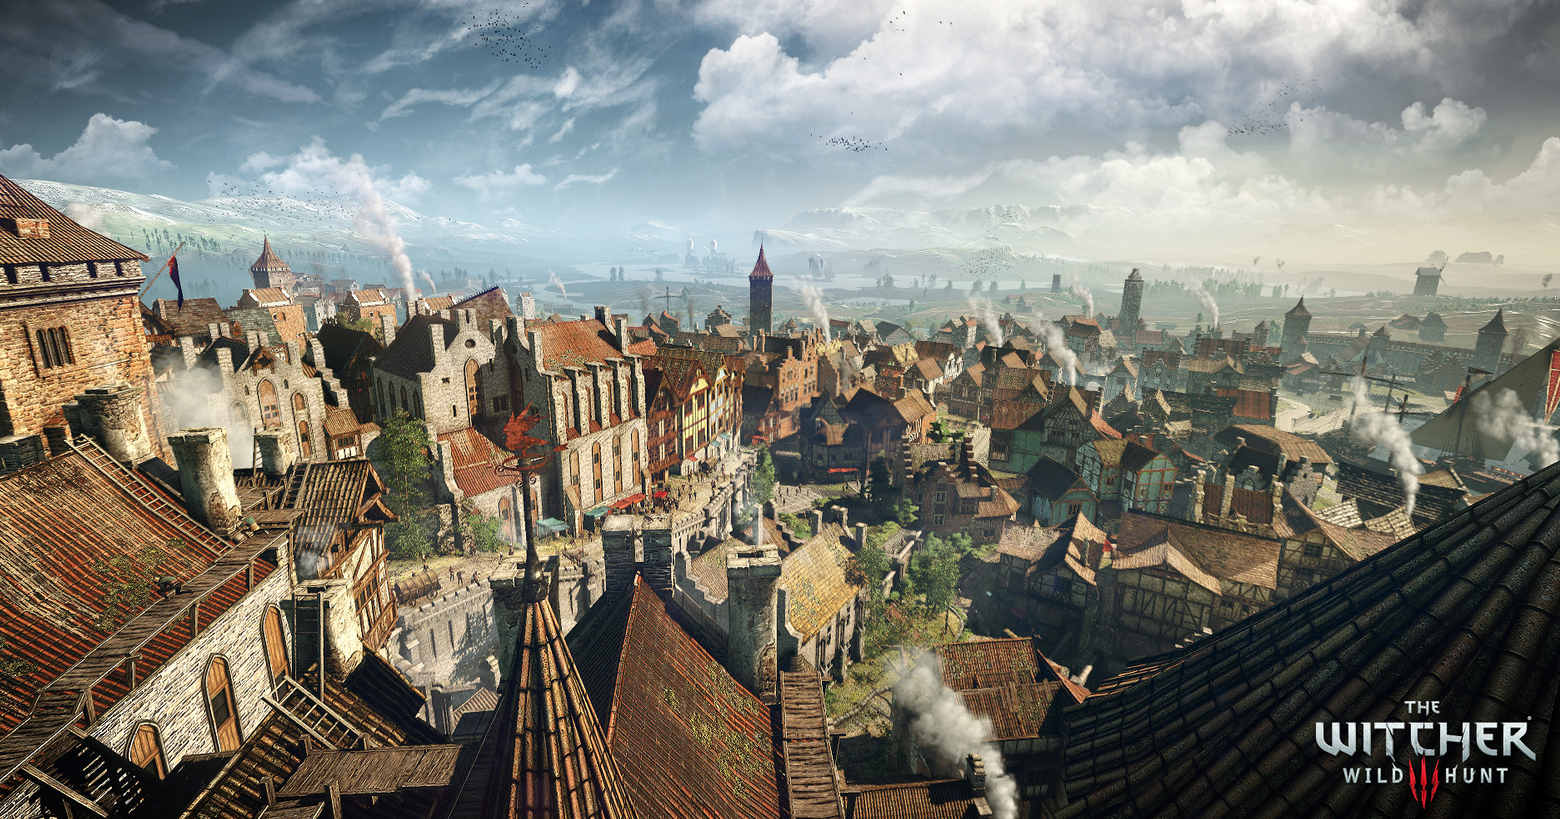 There will certainly be cities in The Witcher 4 as well. Here is a bird's eye view of a medieval town in a long shot from W3: Wild Hunt. We are looking from the rooftops during the day at many beautiful buildings of different sizes with different house facades, roofs, and balconies. In the center of the picture, there is a kind of stone bridge that runs from the front left to the background to the center of the picture. Next to it, a green park with trees and bushes is shown. Smoke is coming out of many chimneys. Behind the city, the landscape with mountains can be seen in the distance, and above we can see the bright sky with white clouds. A release date for the new Witcher game still seems to be a long way off.